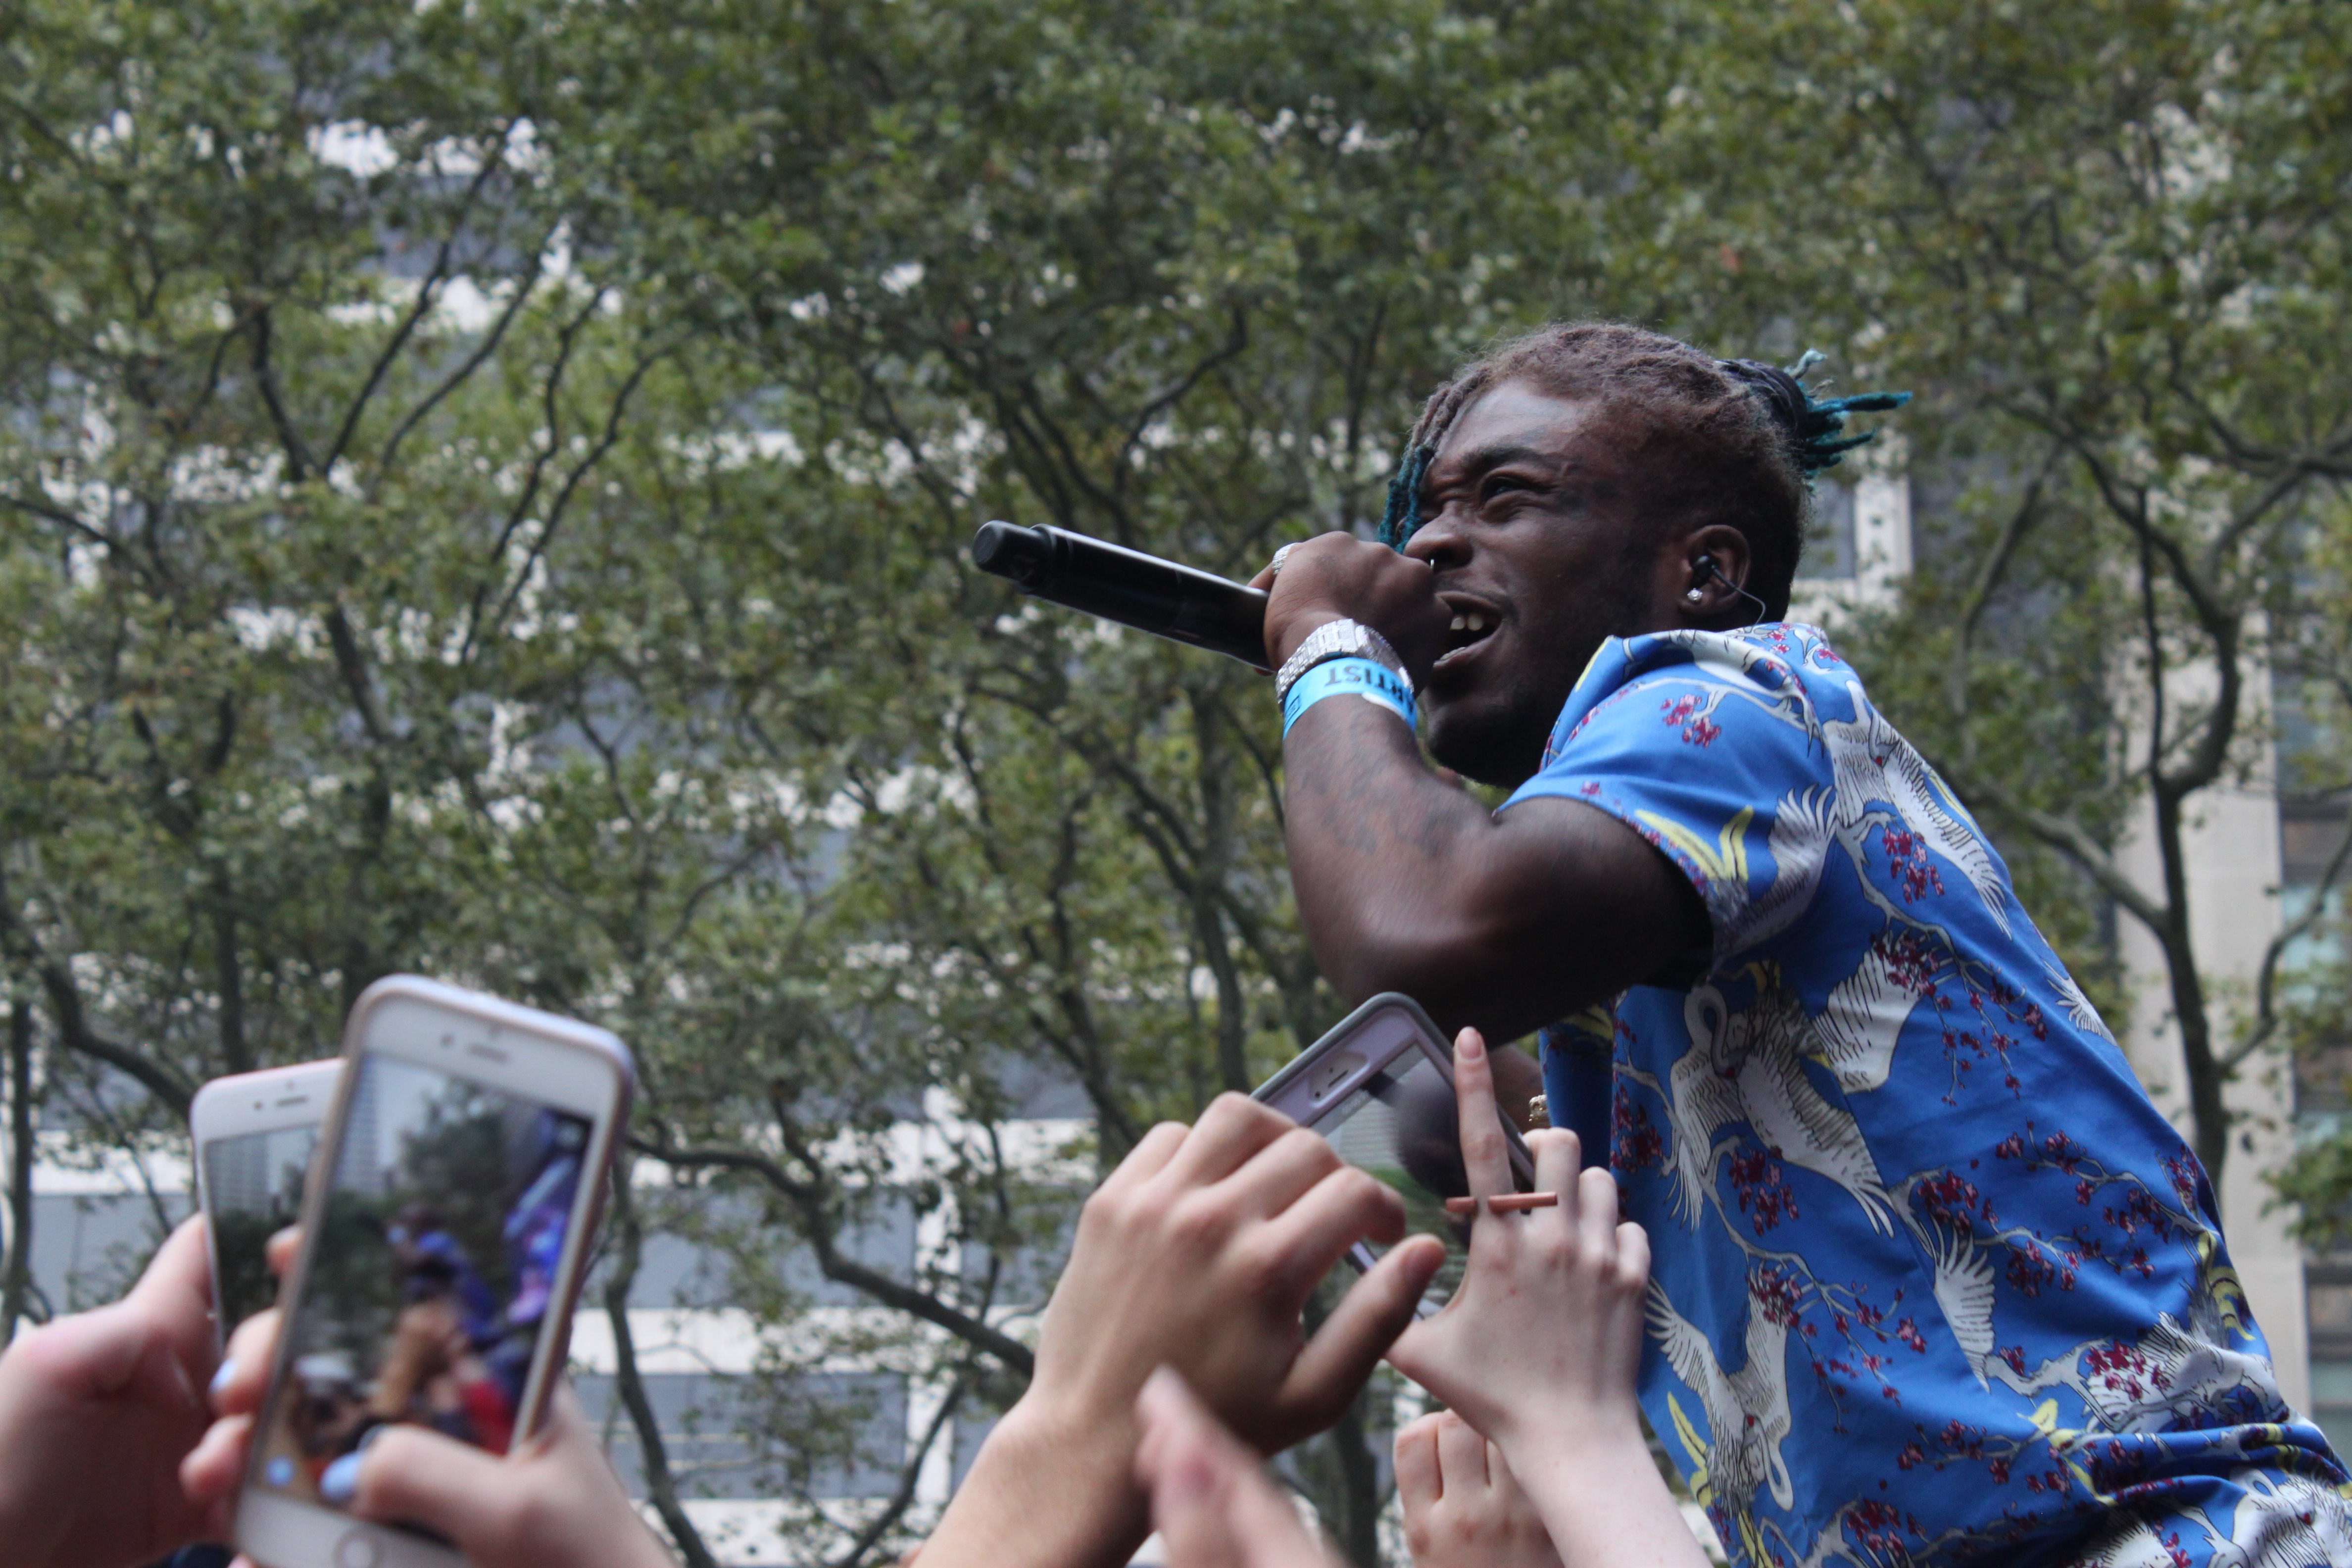 The kids lose it for Lil Uzi Vert @ Roots Picnic New York